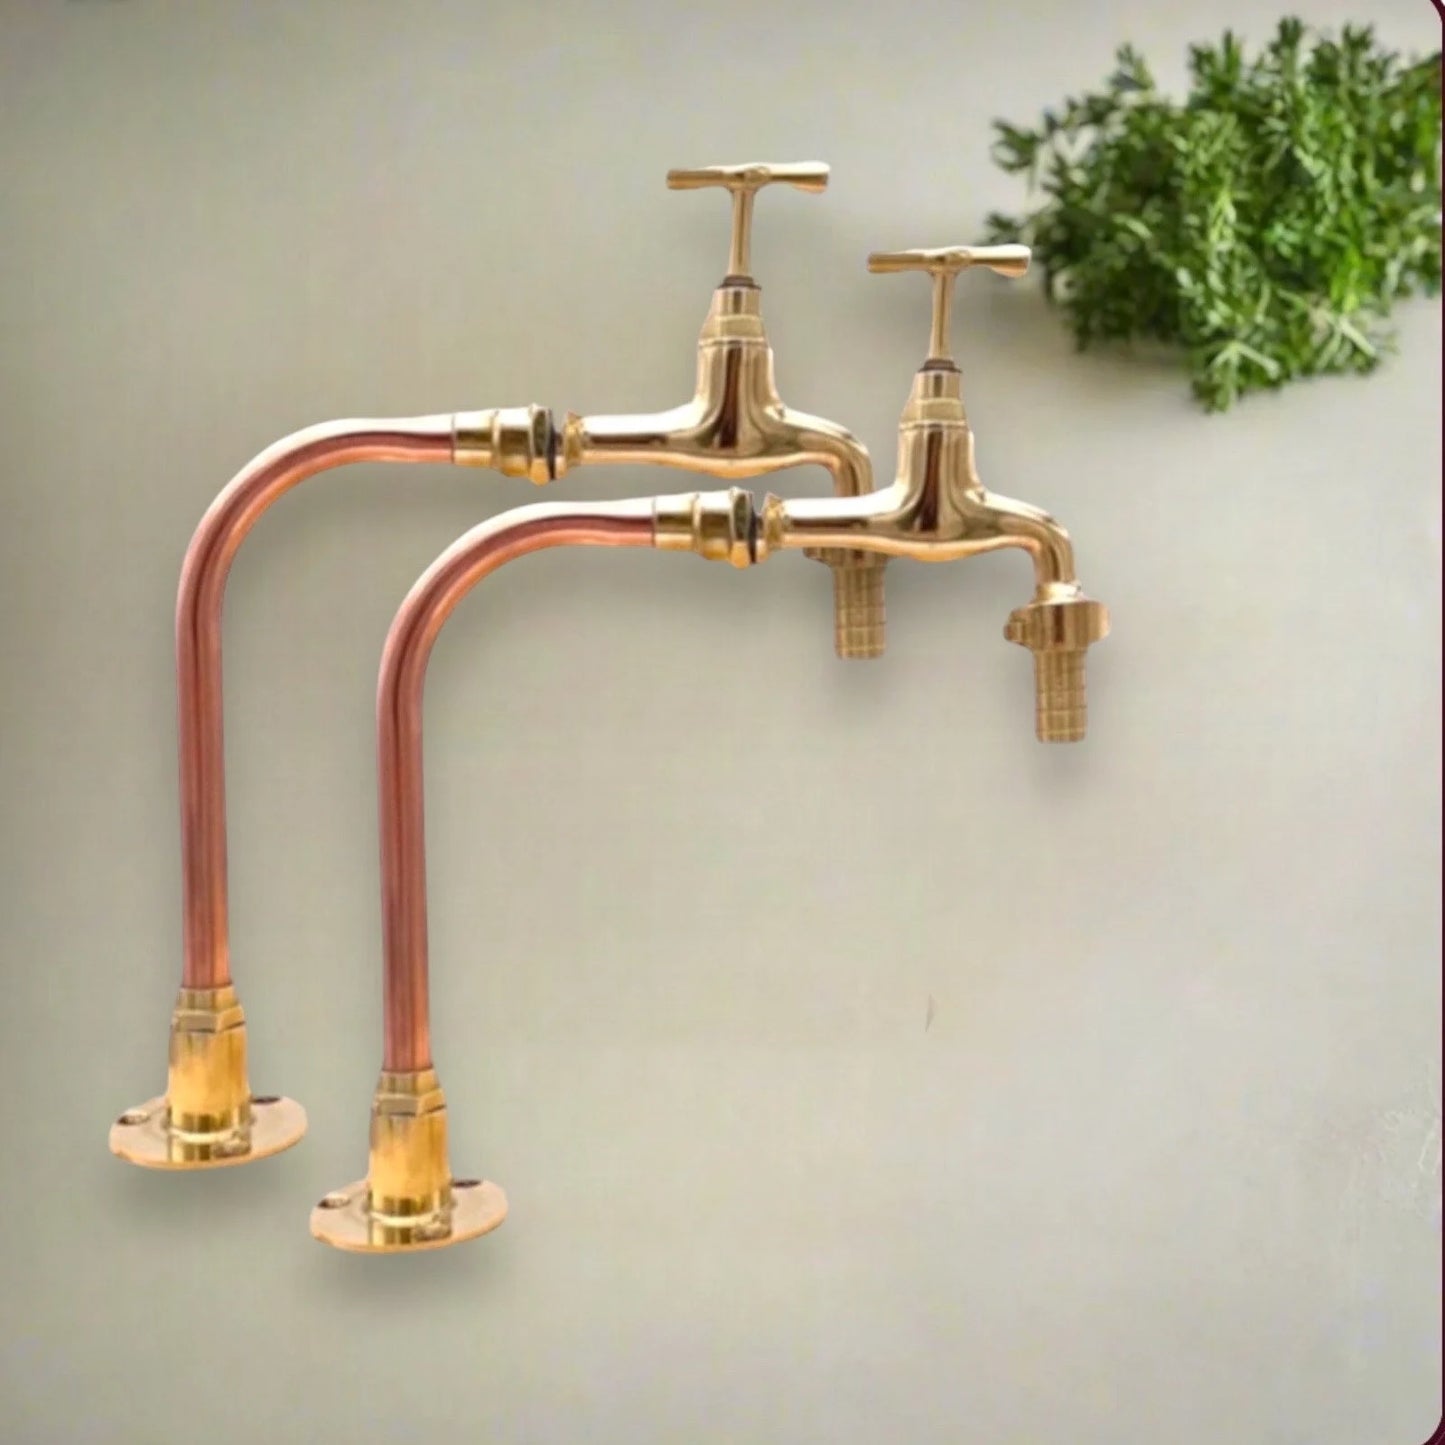 Pair of handmade copper and brass swan neck taps with detachable nozzle sold by All Things French Store